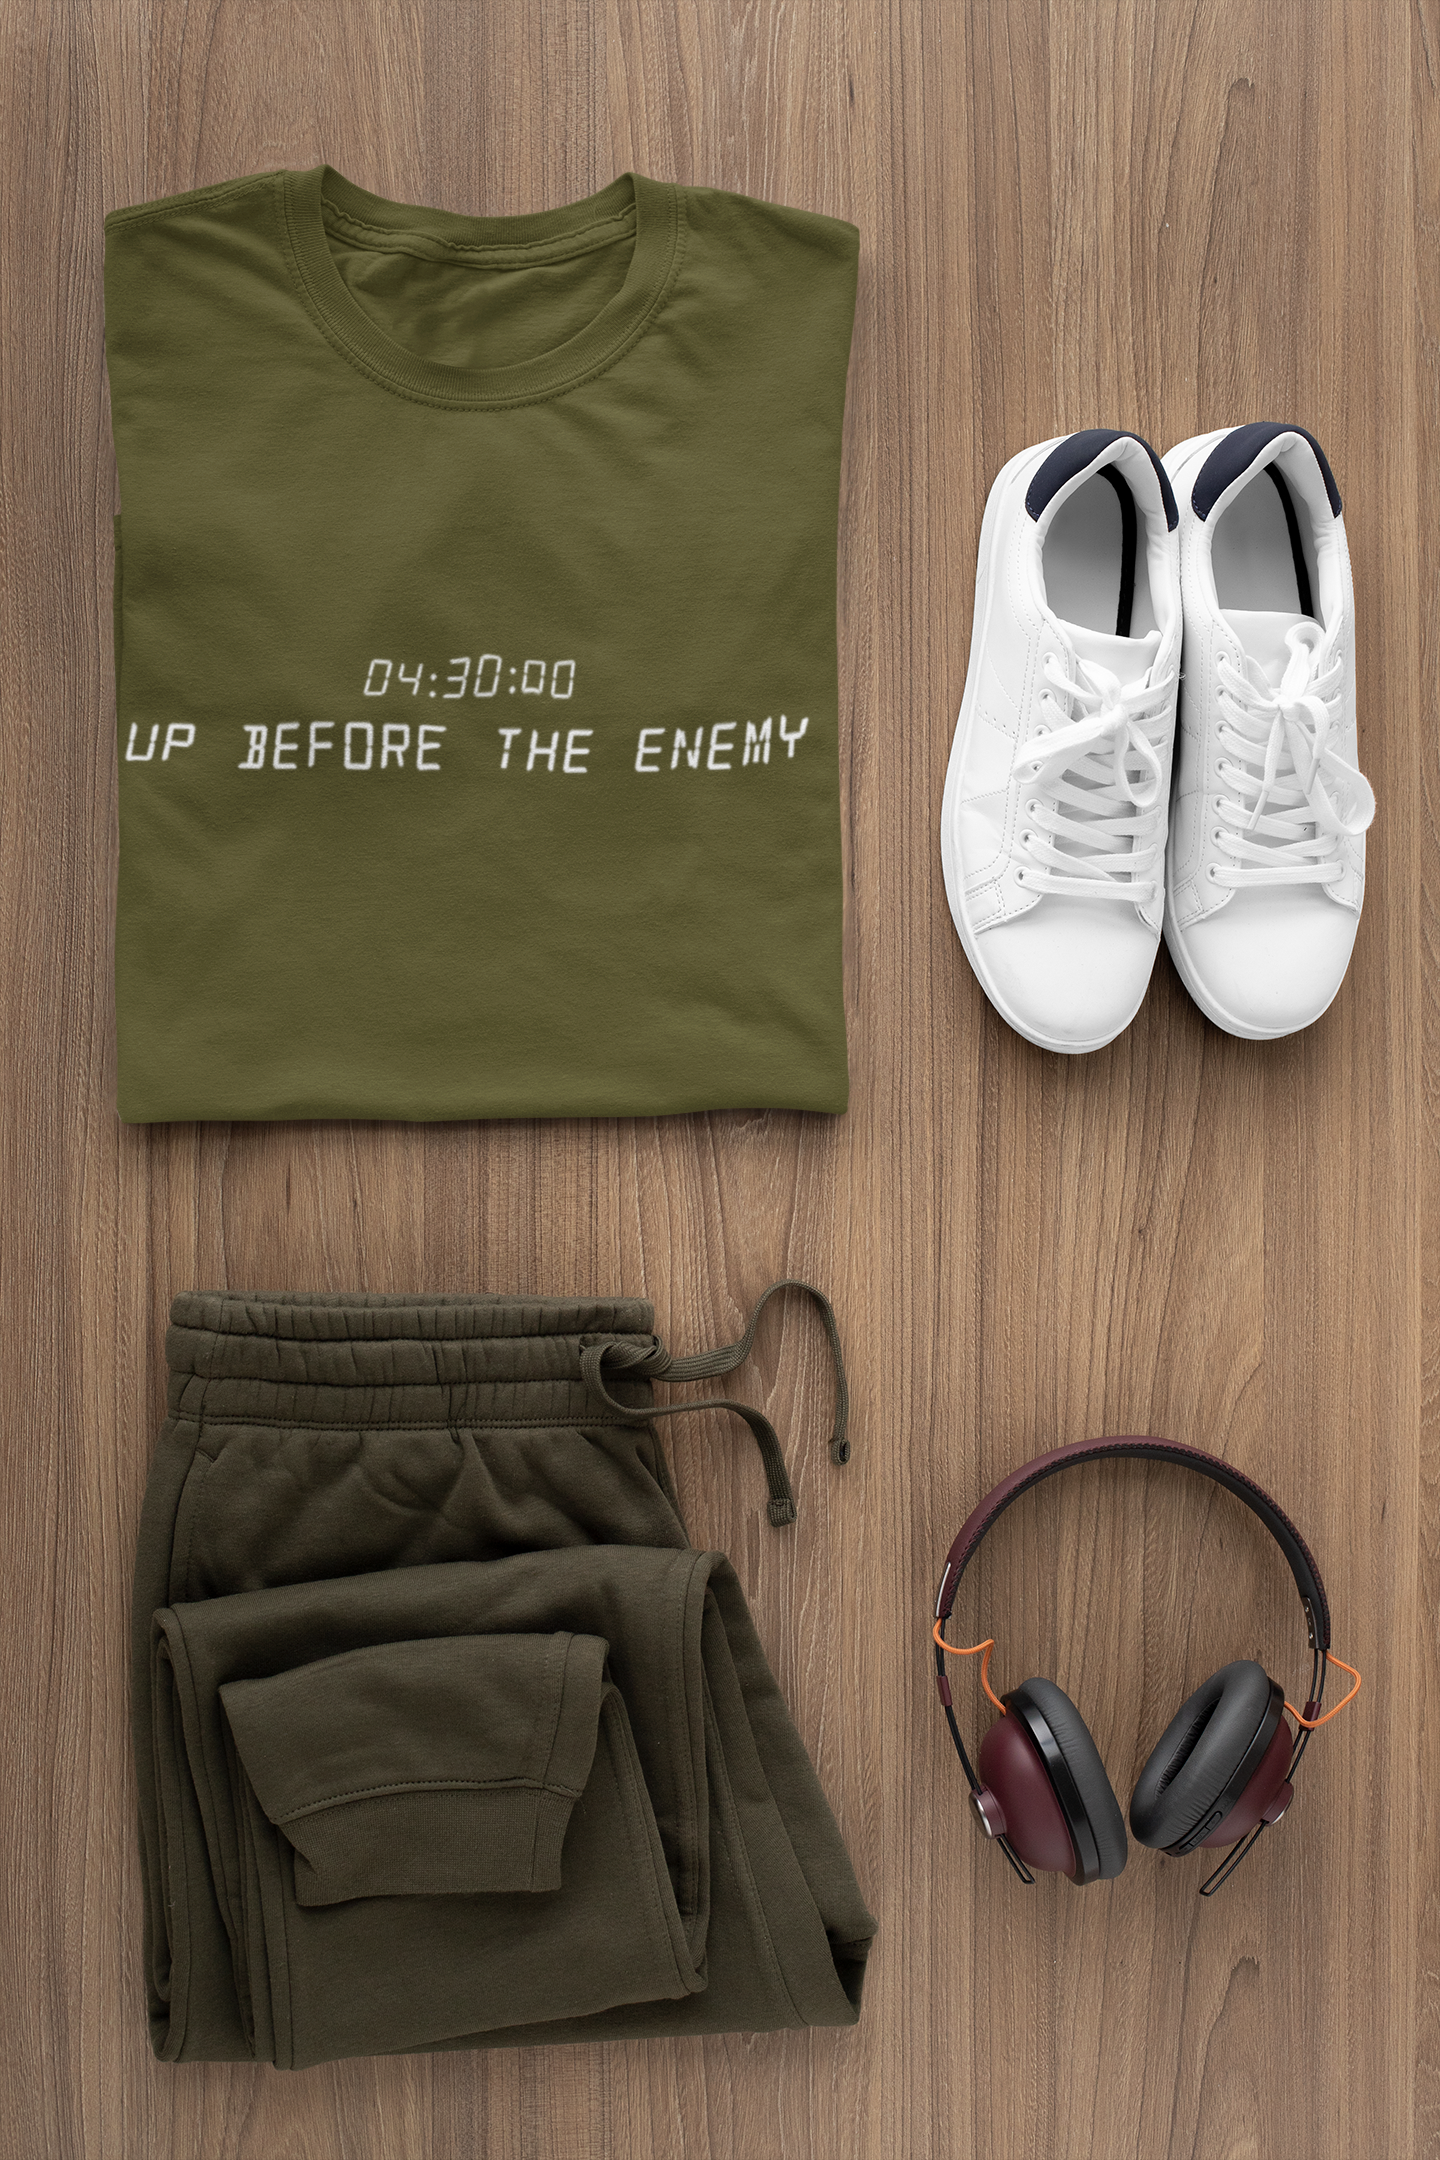 430AM Up Before The Enemy - Jocko Willink Inspired Navy Seal Army Graphic T Shirt with Quote